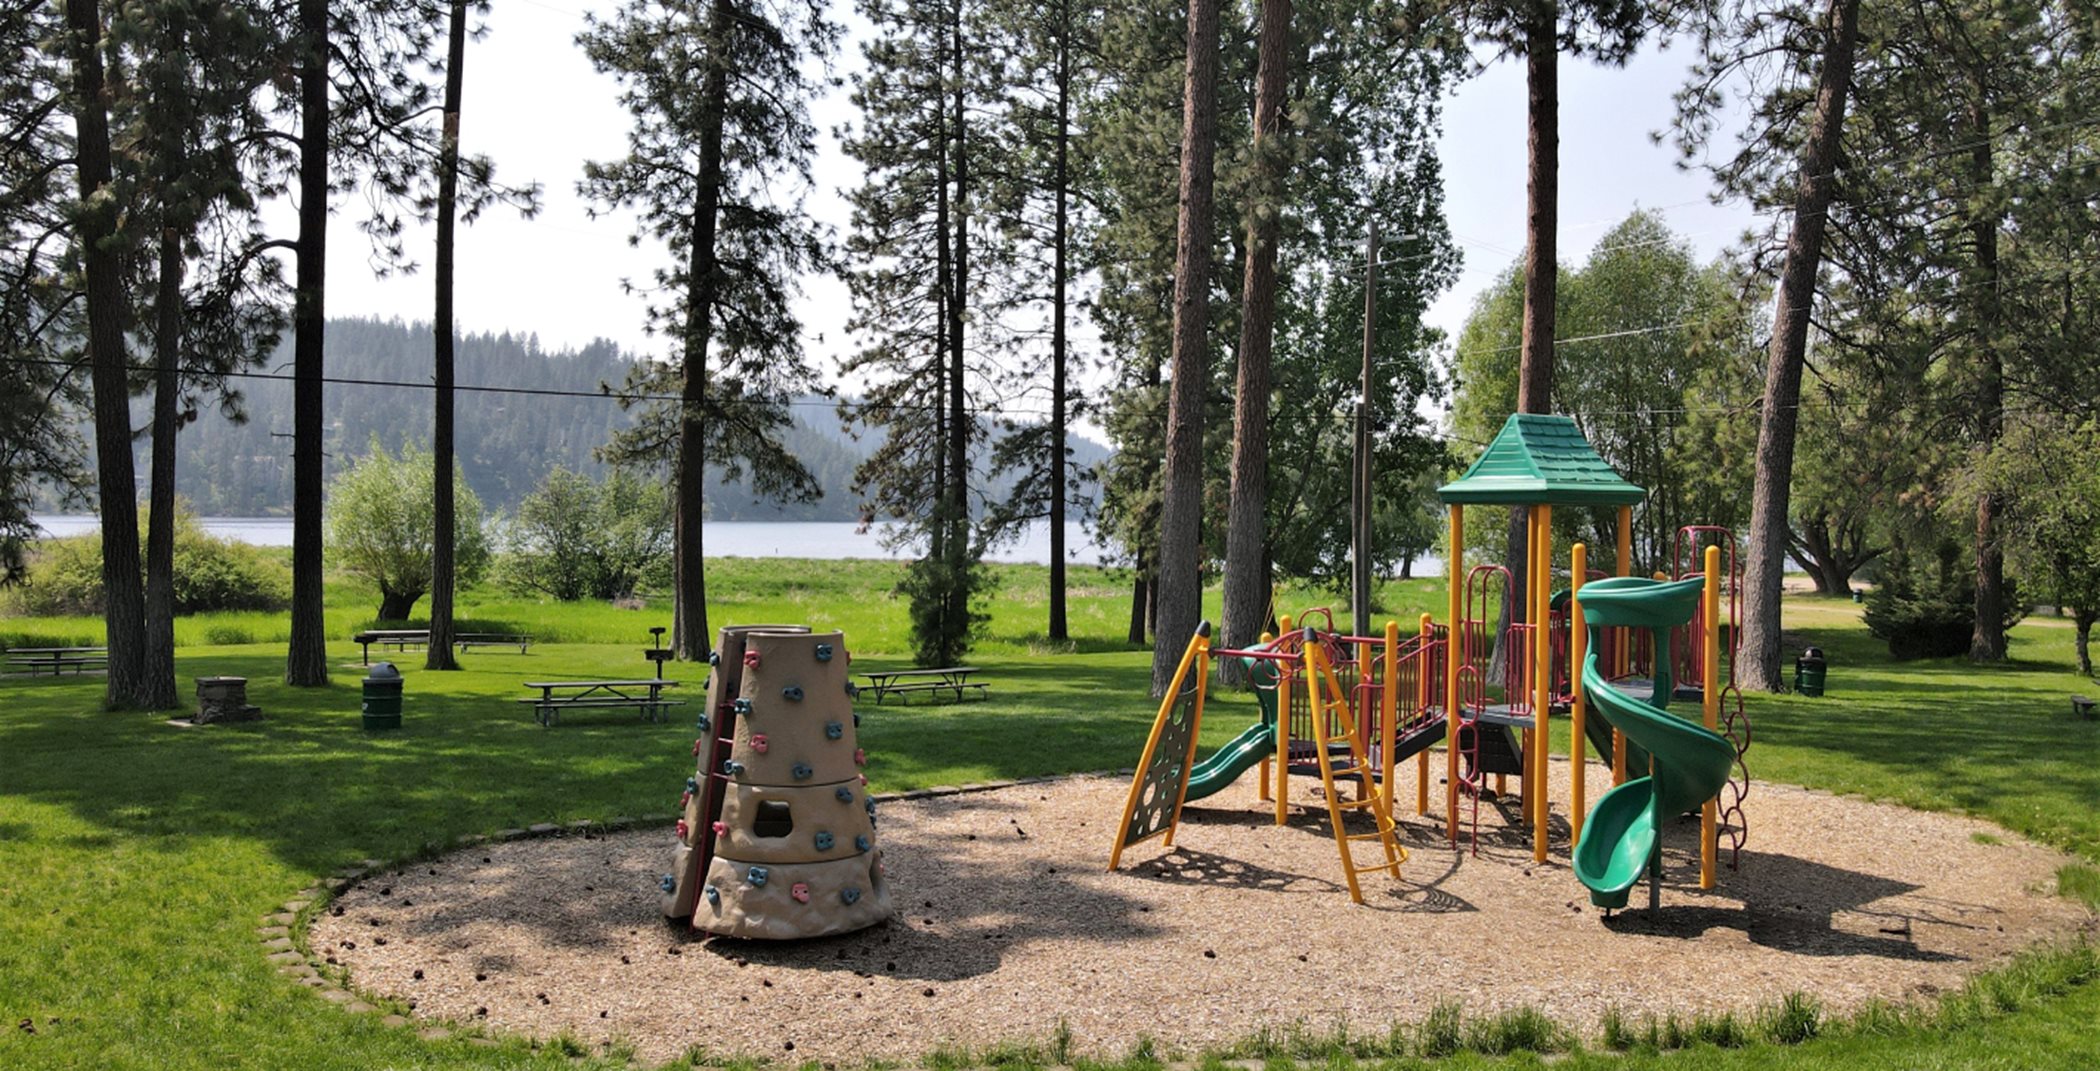 Playset in a lightly forested area